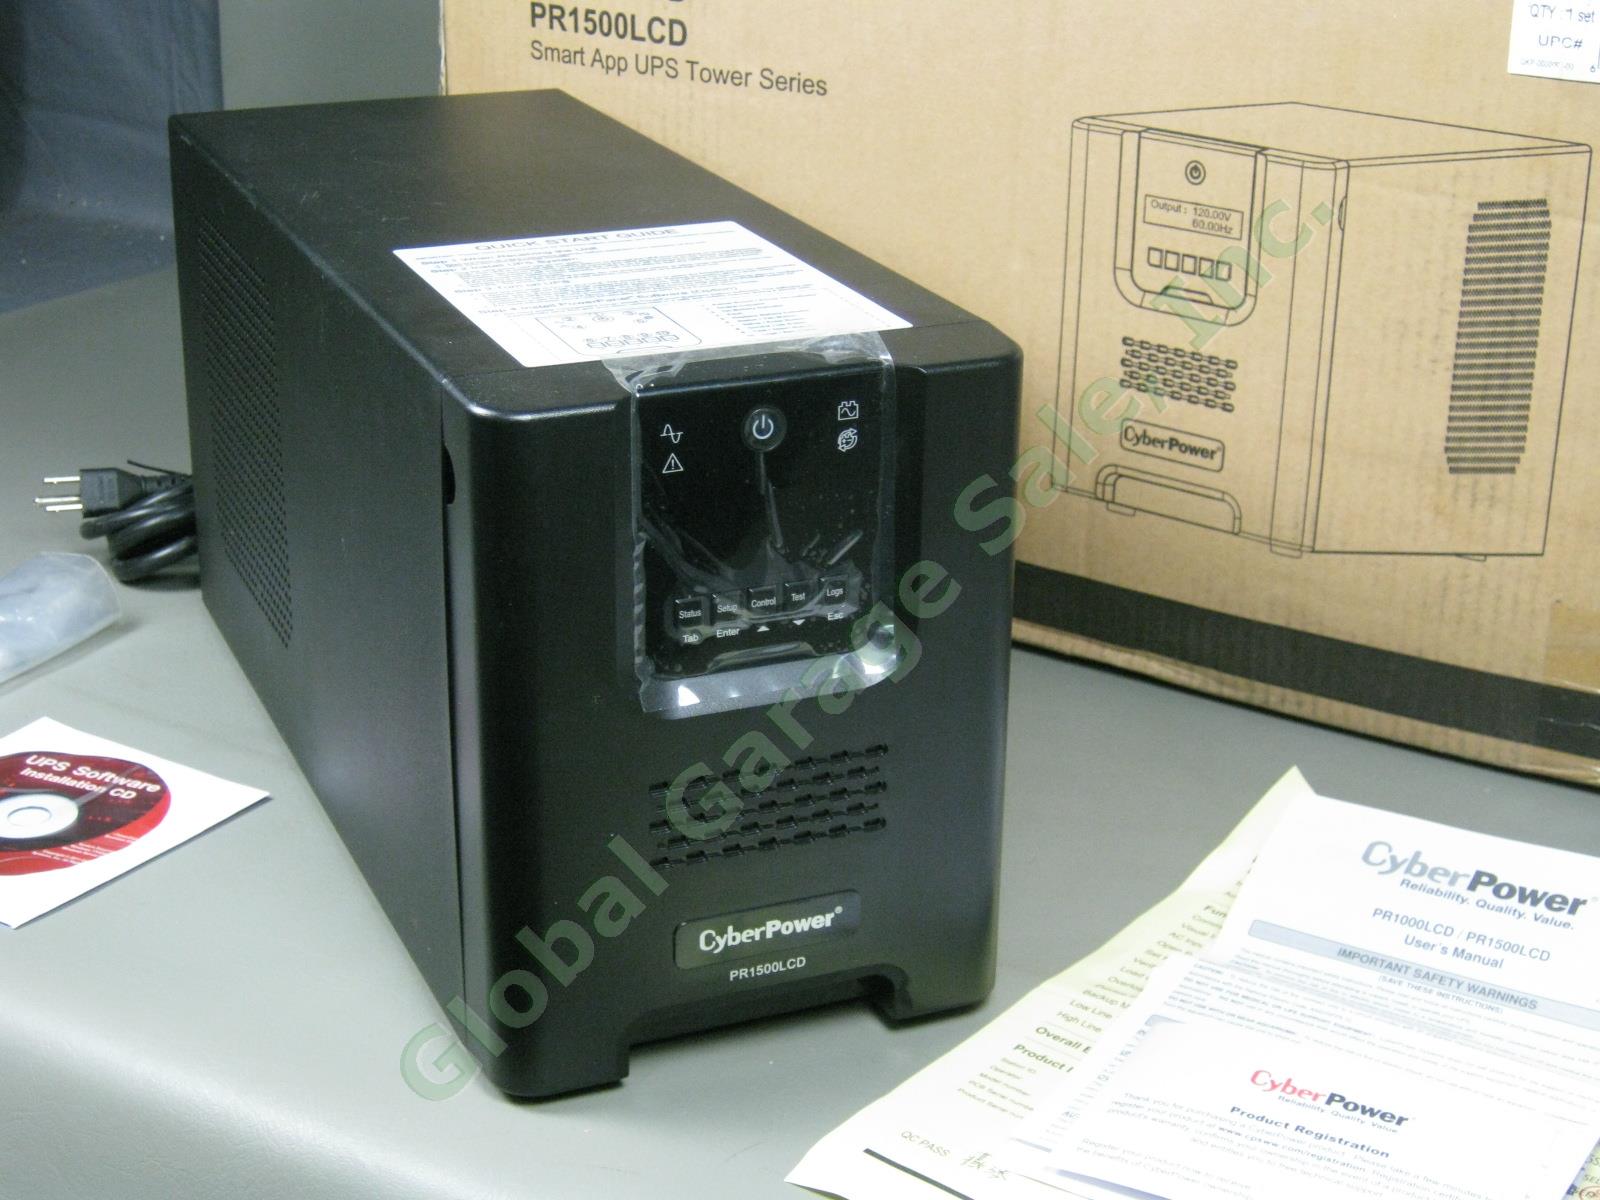 CyberPower PR1500LCD LCD UPS 1500VA 1050W Smart App Sine Wave Tower Barely Used! 1